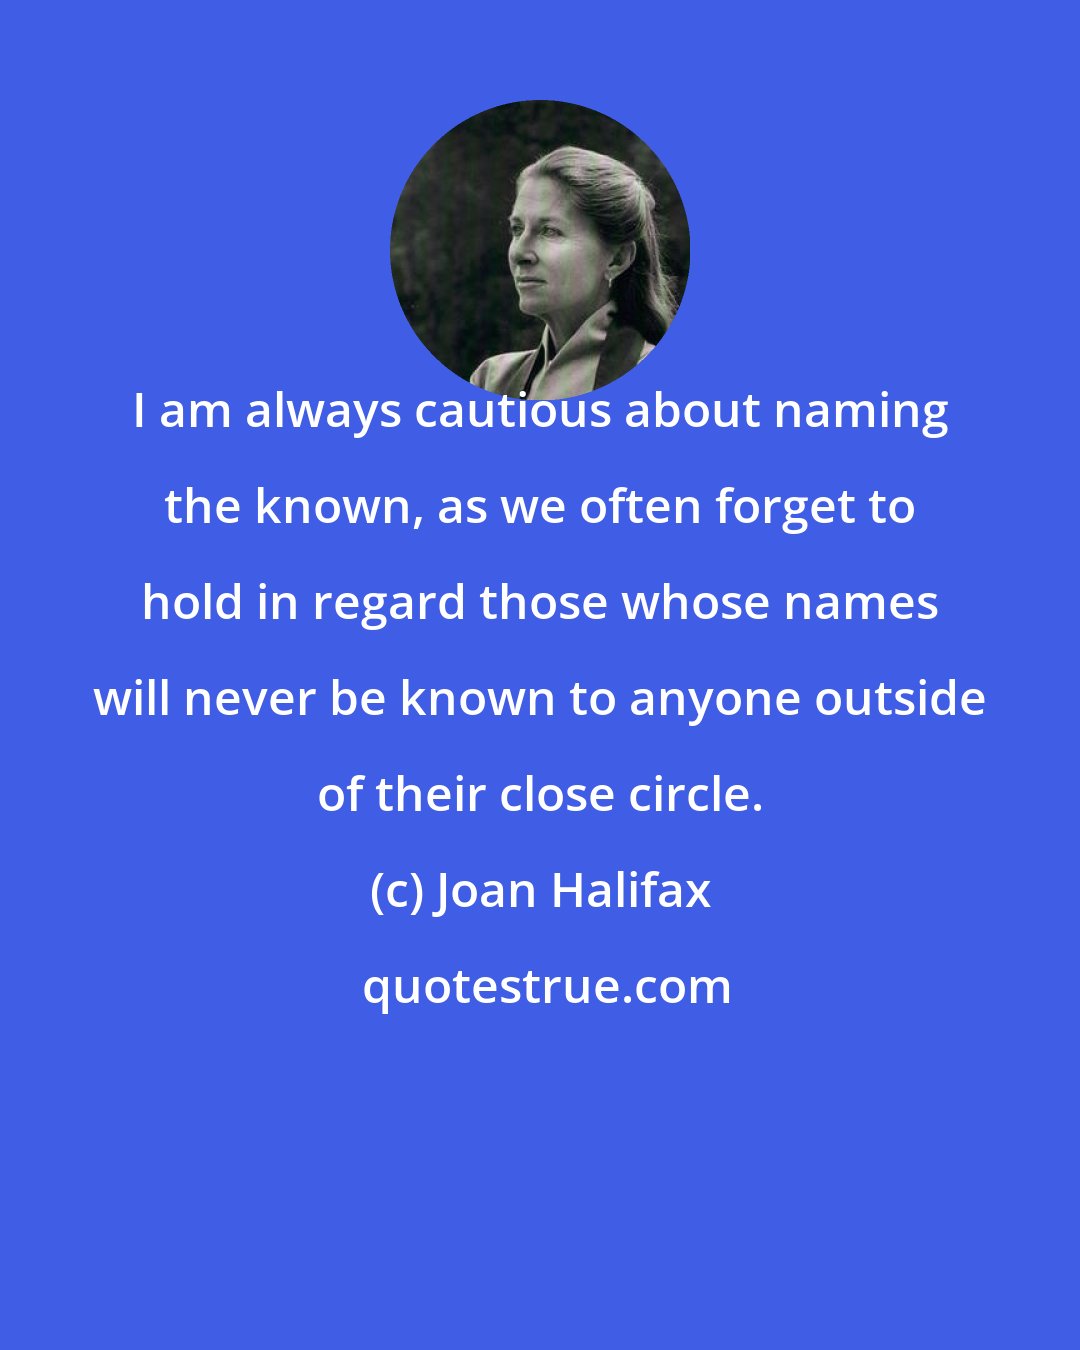 Joan Halifax: I am always cautious about naming the known, as we often forget to hold in regard those whose names will never be known to anyone outside of their close circle.